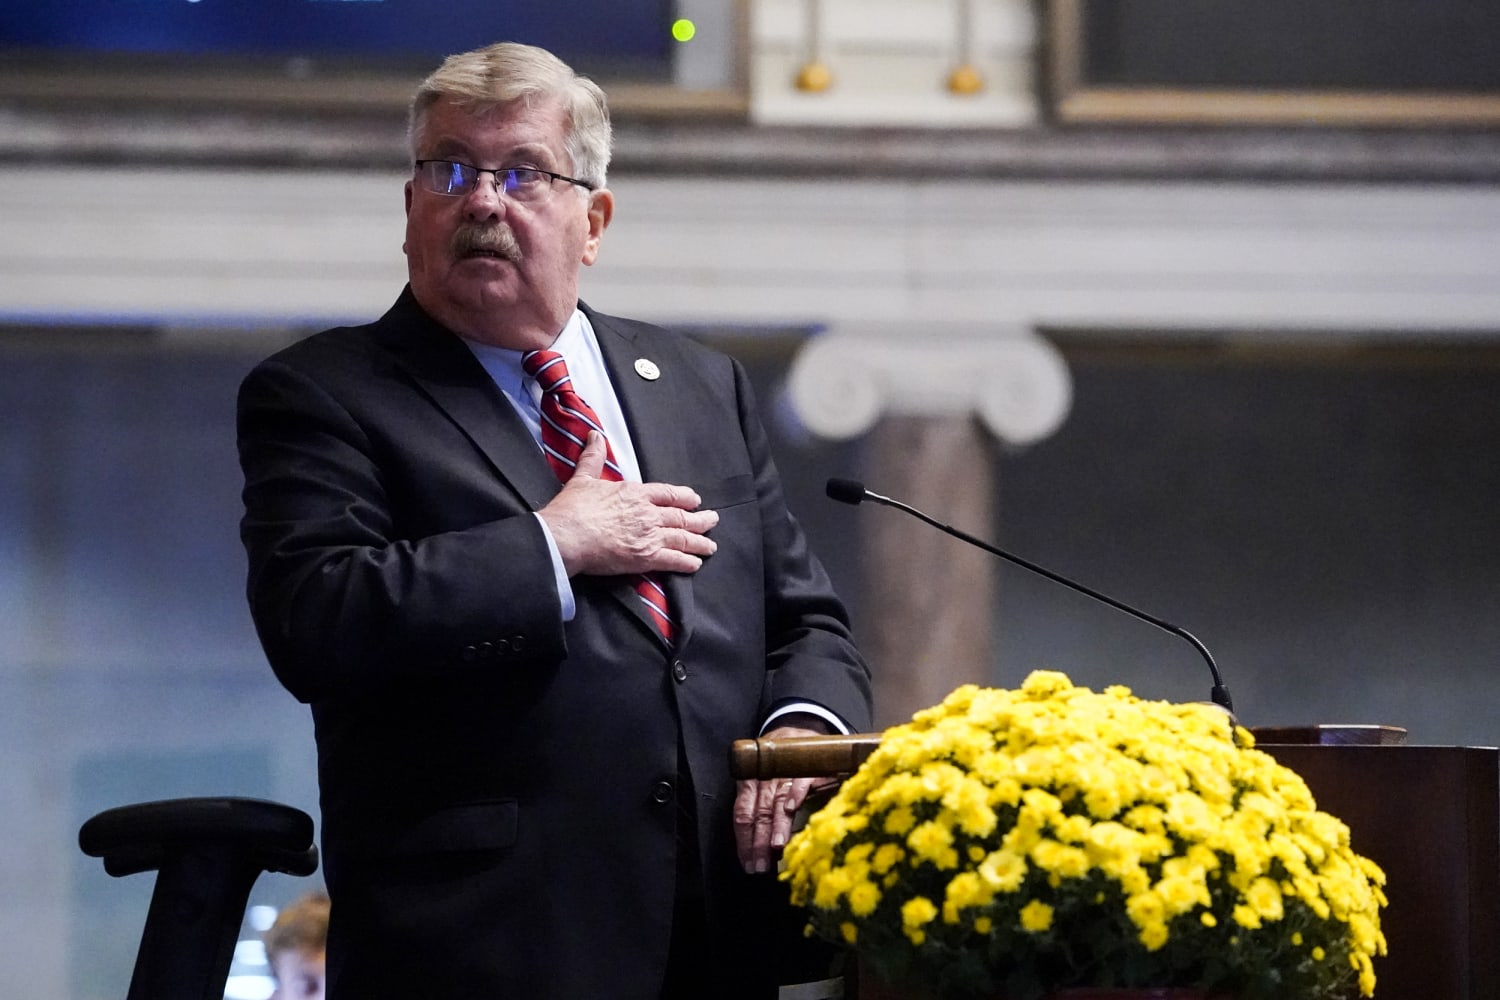 Tennessee lieutenant governor 'pausing' his social media activity